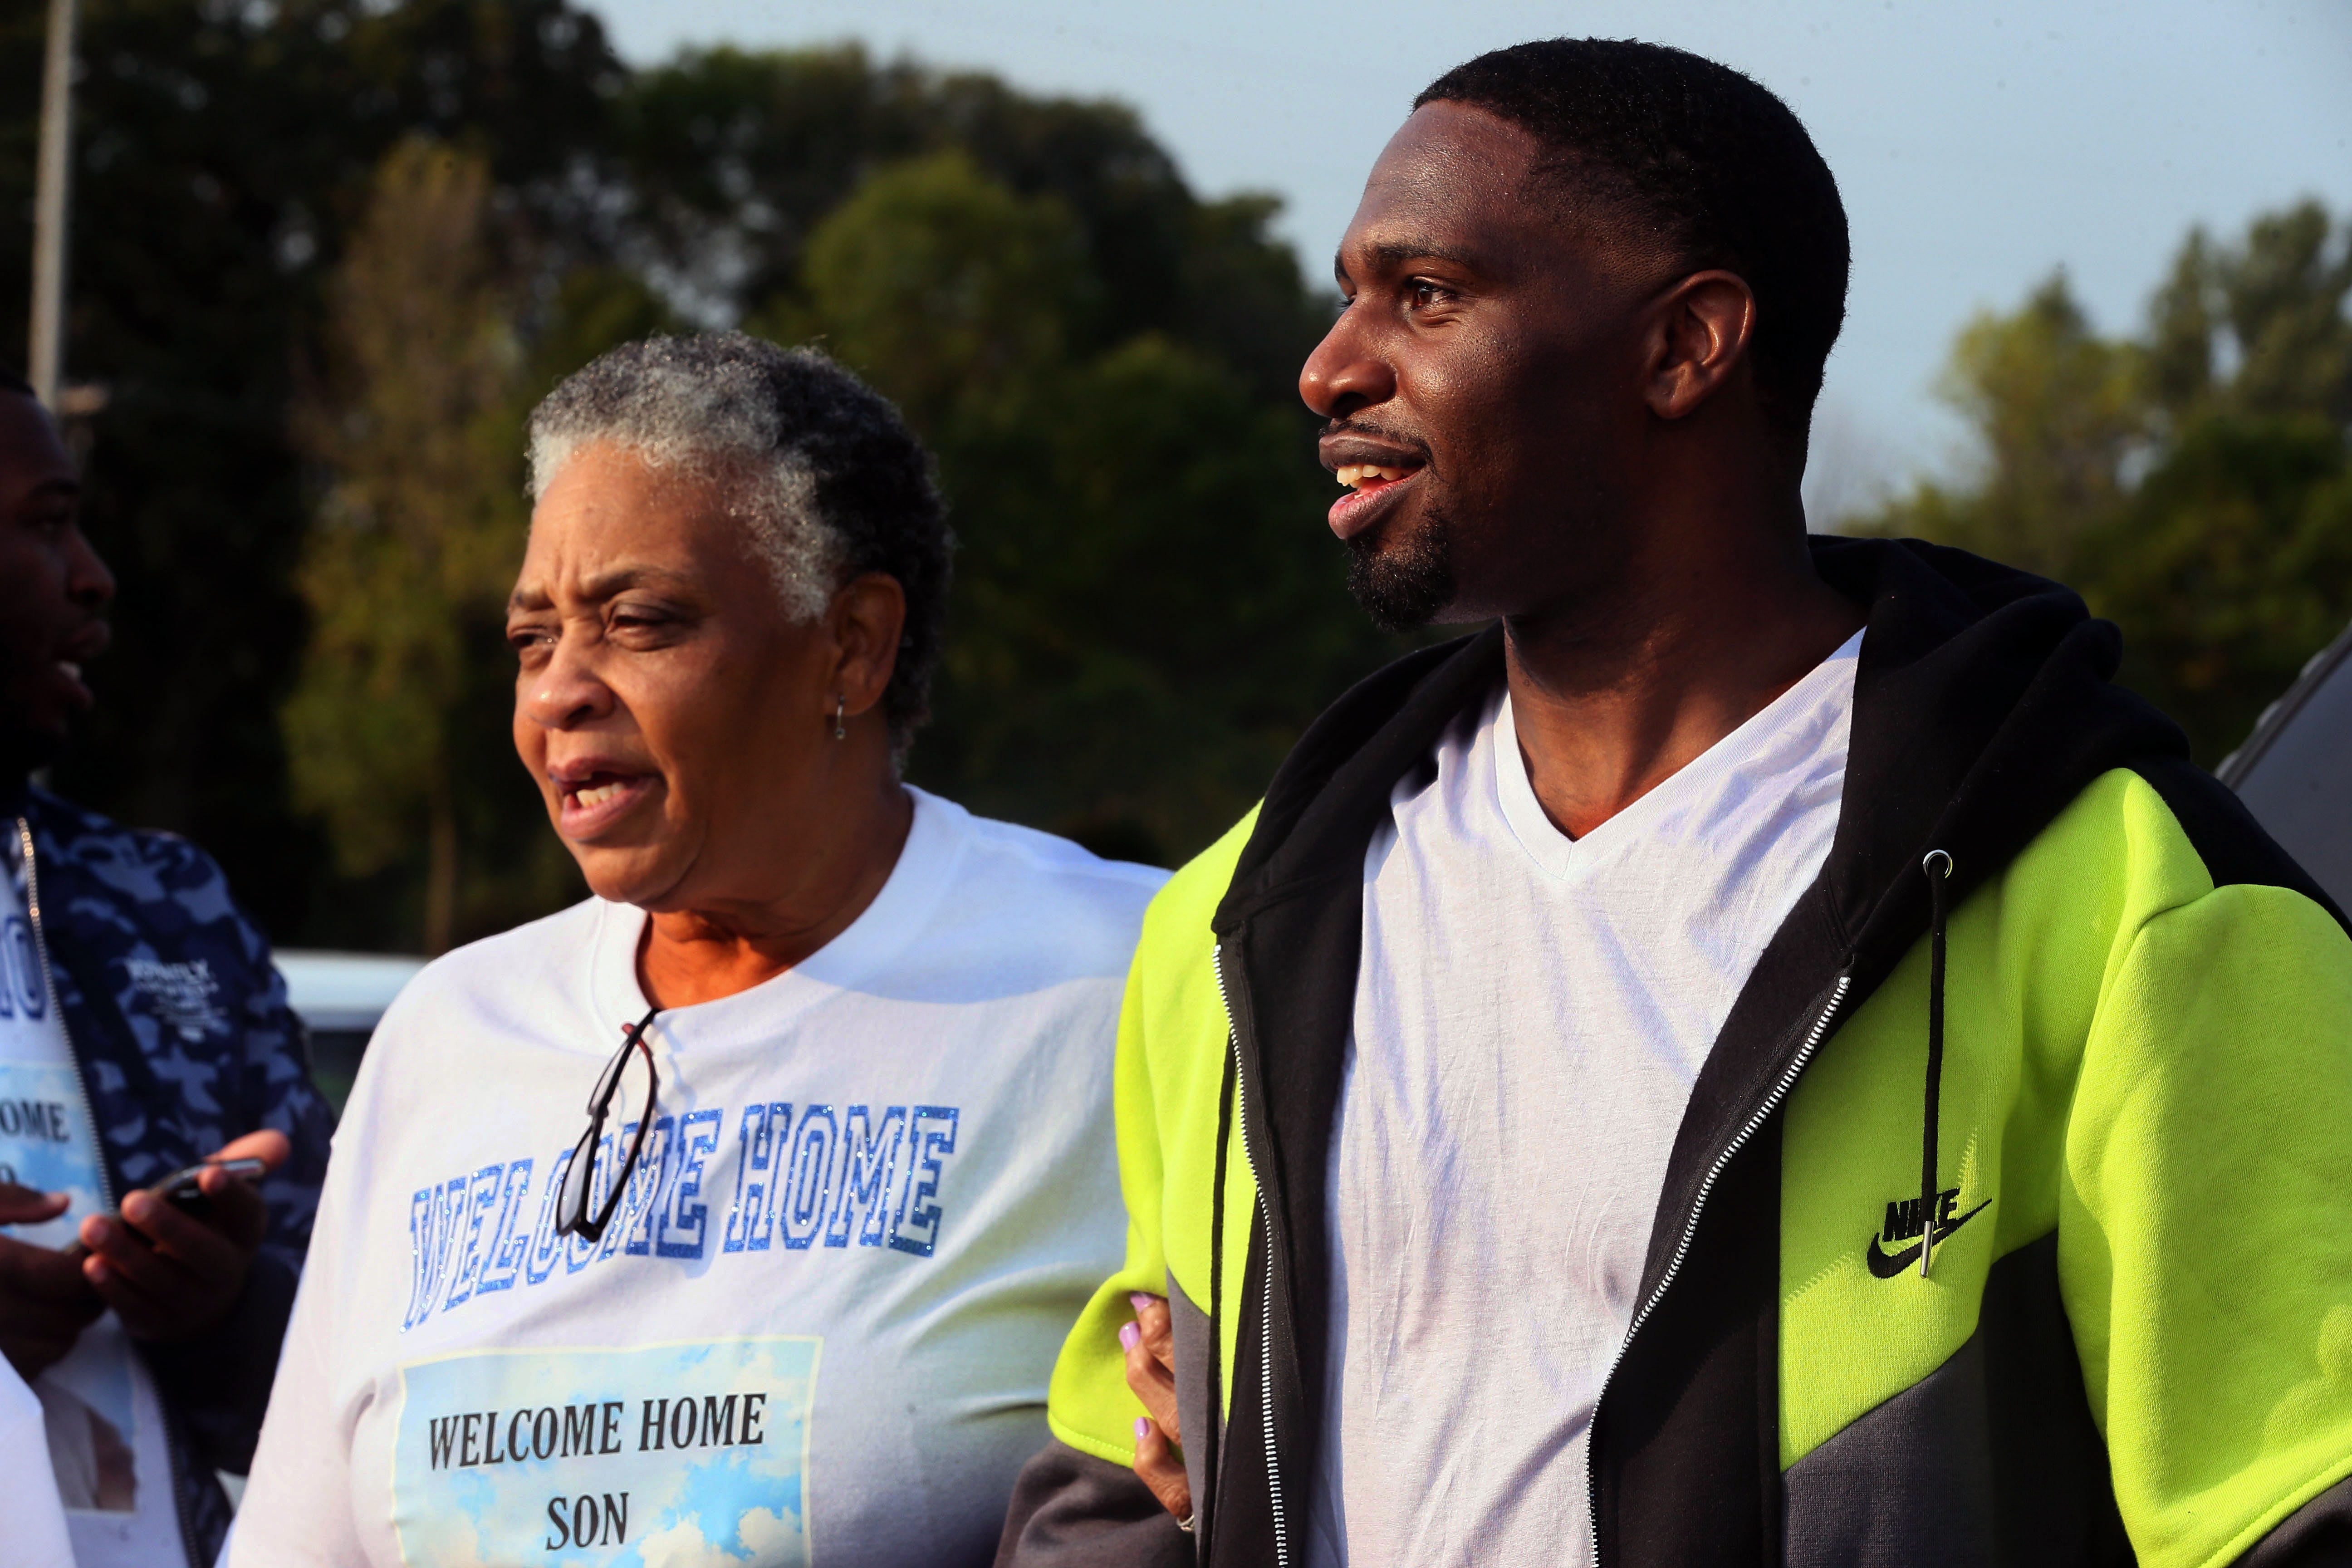 Doris Williams, 65, left, the mother of Marlin Dixon, right, welcomes him on his release from John C. Burke Correctional Center on Sept. 22, 2020.